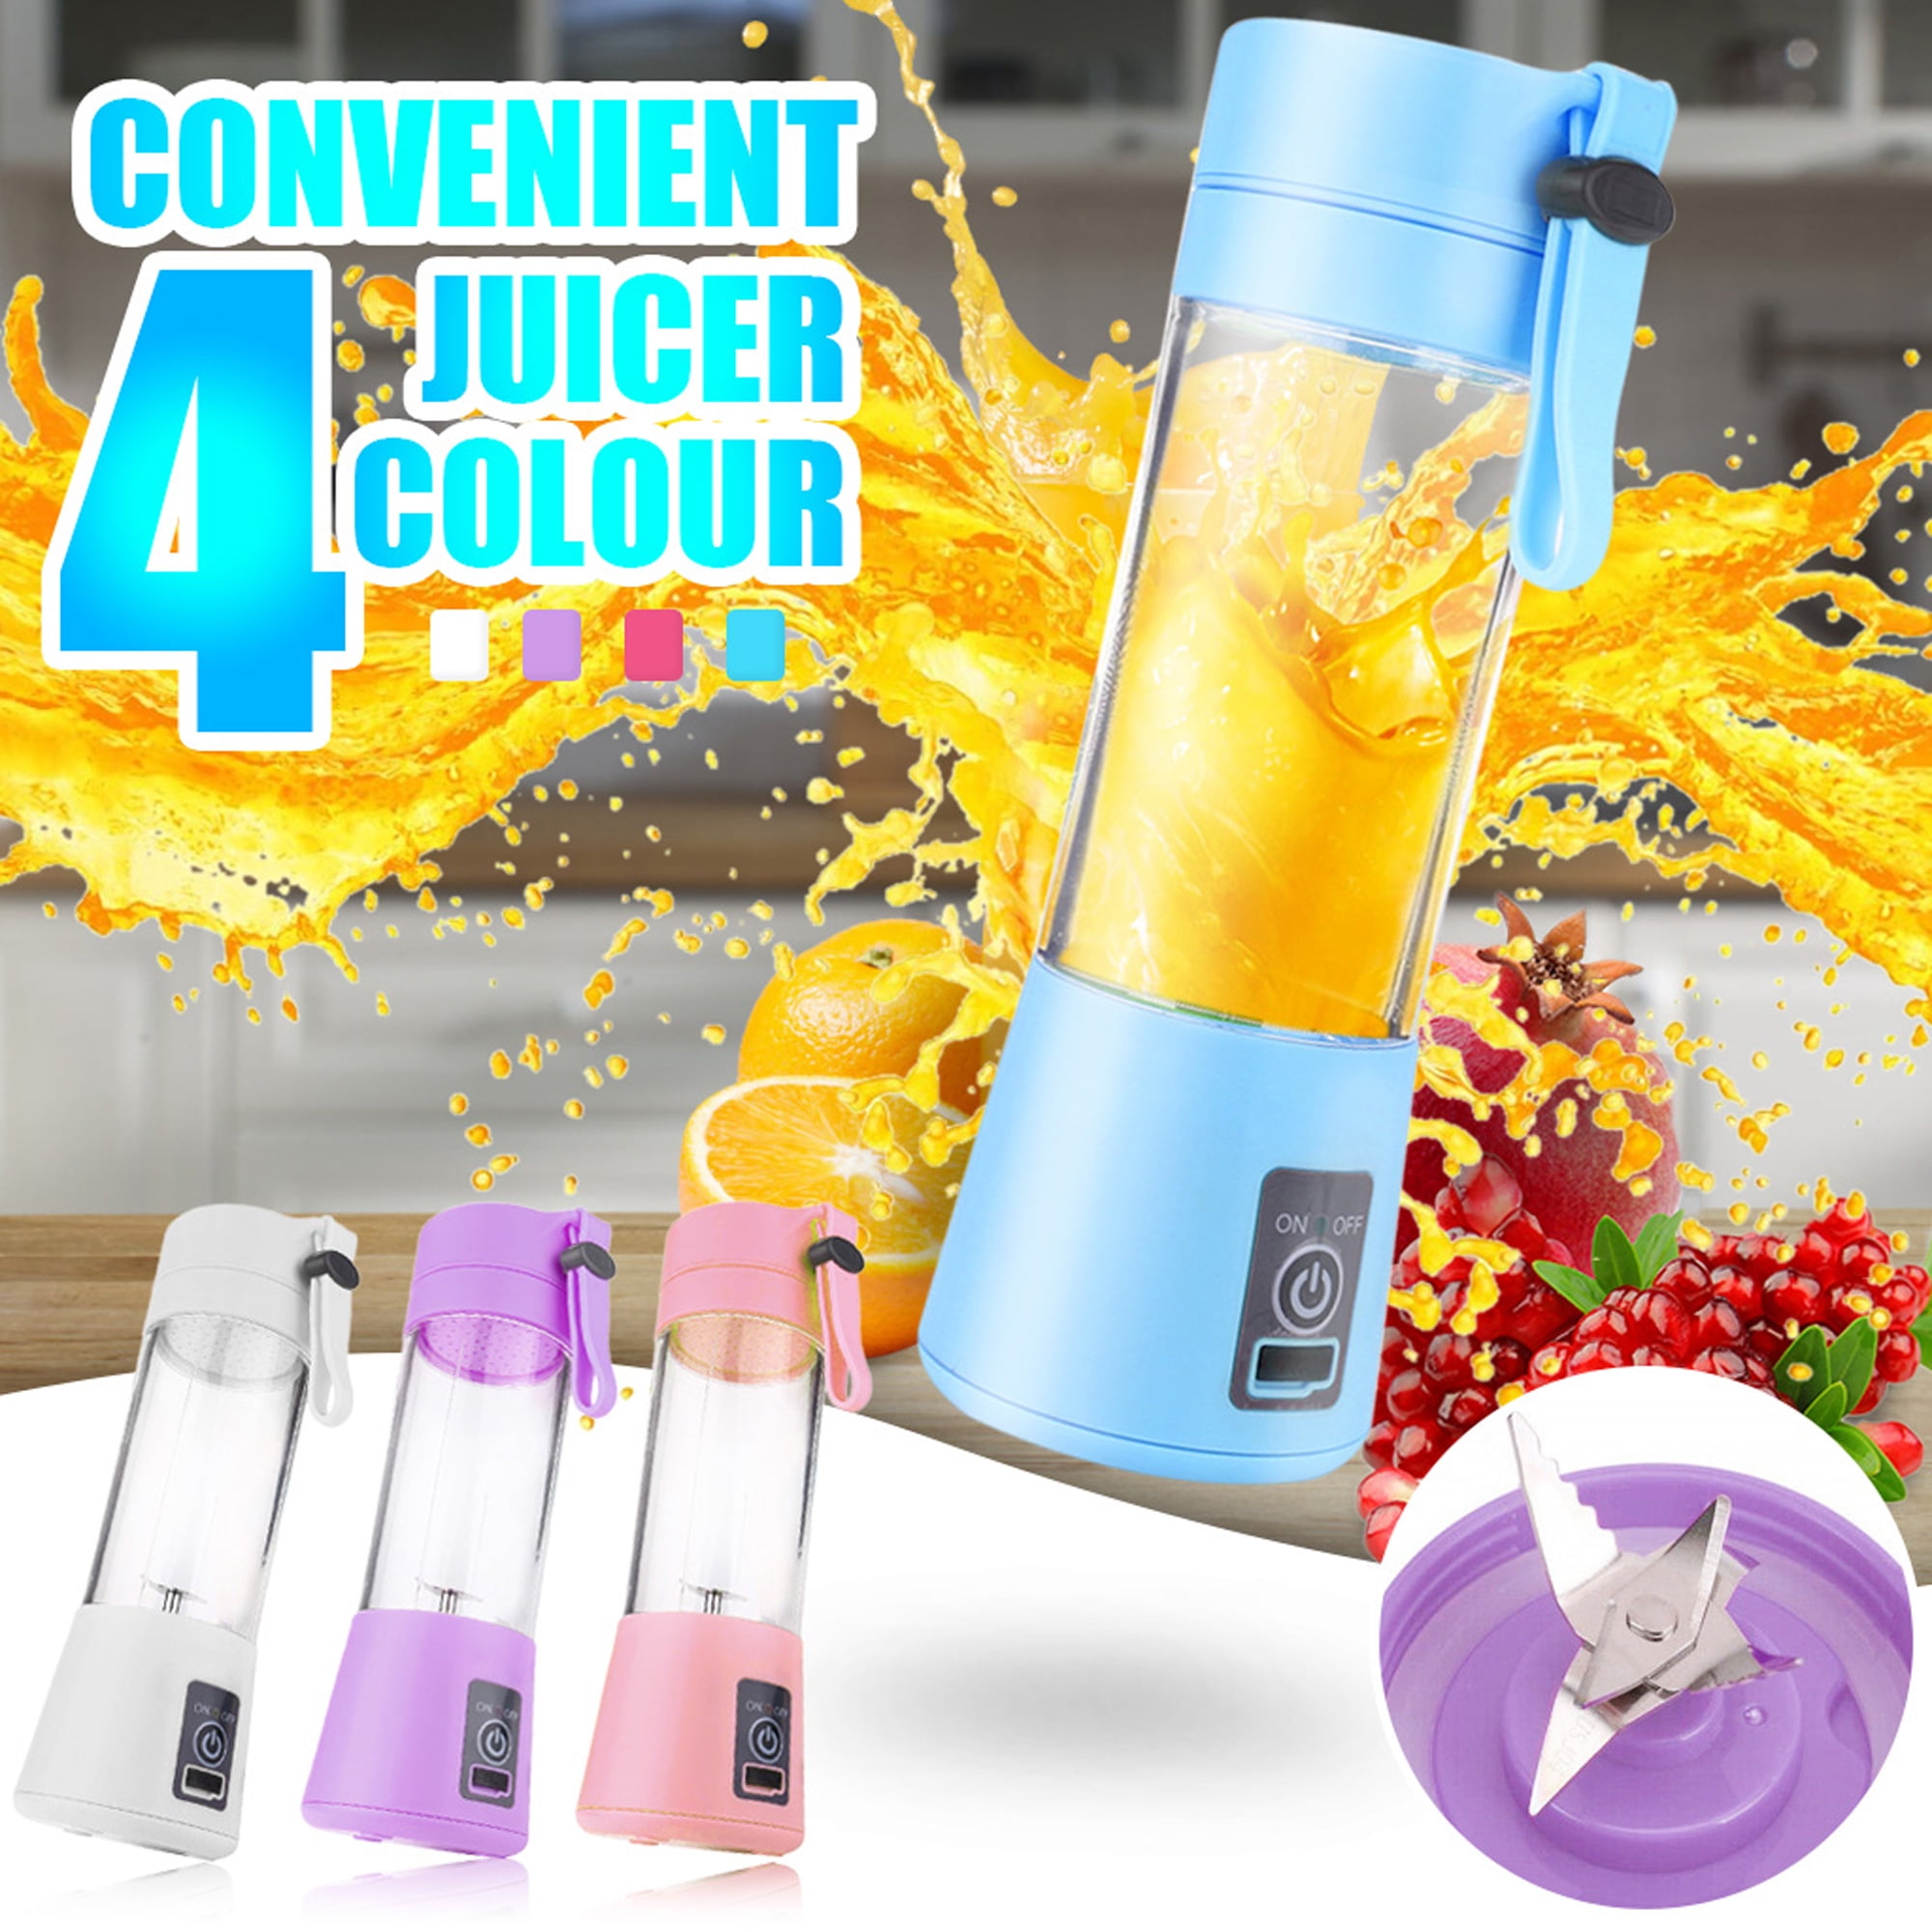 Portable Blender,Mini USB Blender for Shakes and Smoothies,13.5 oz Juicer Cup Type-C Personal Blender with Ultra Sharp Six Blades, BPA Free Blender